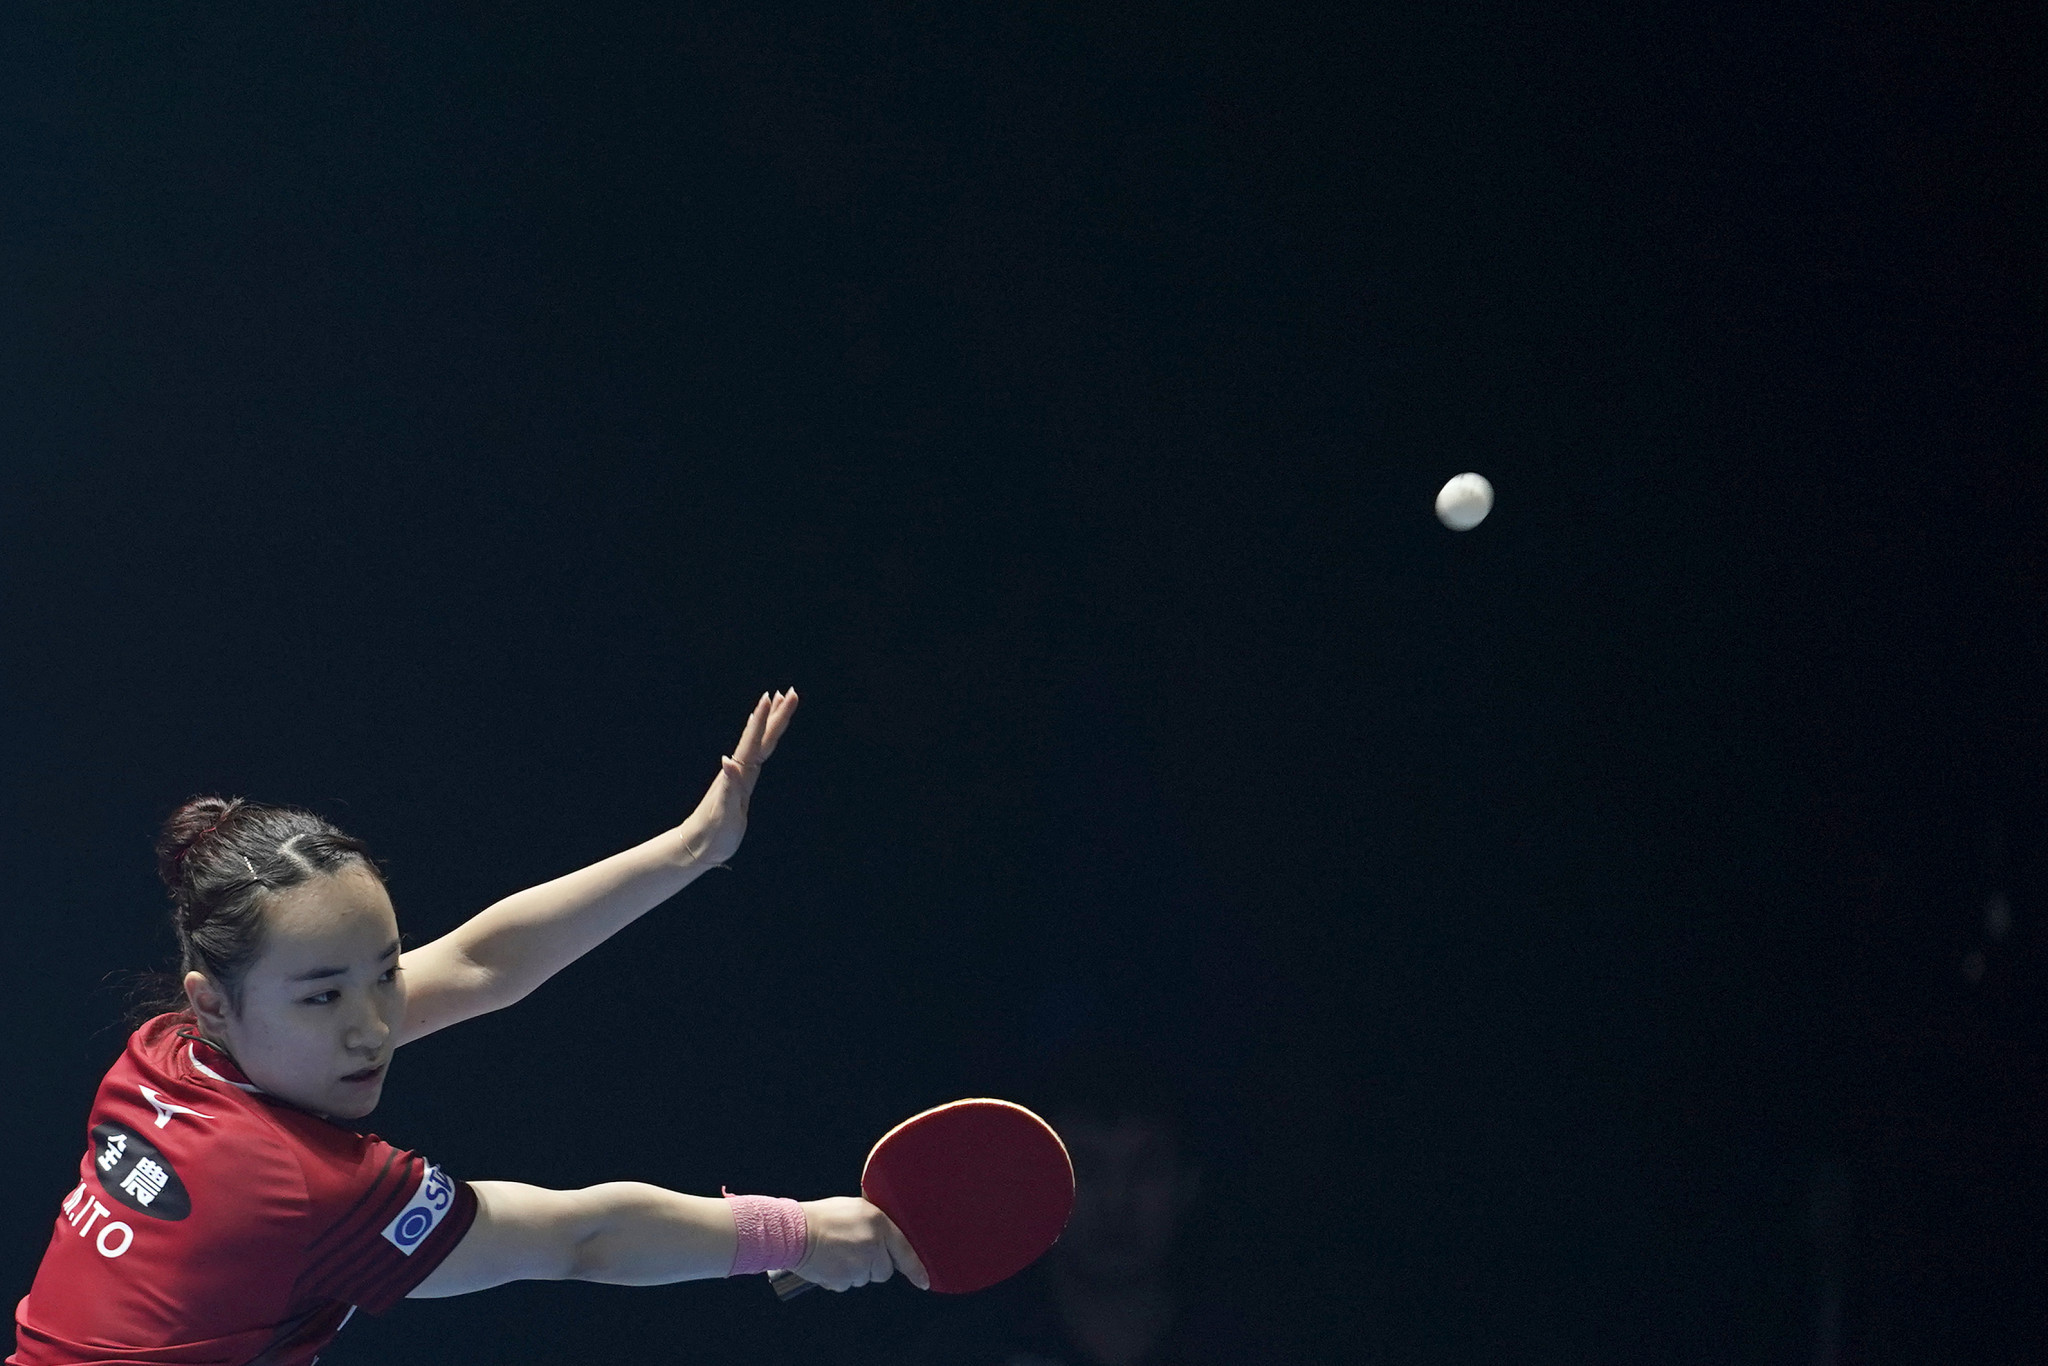 Top seed Mima Ito of Japan fought back from two games down to beat compatriot Hitomi Sato in Budapest ©Getty Images